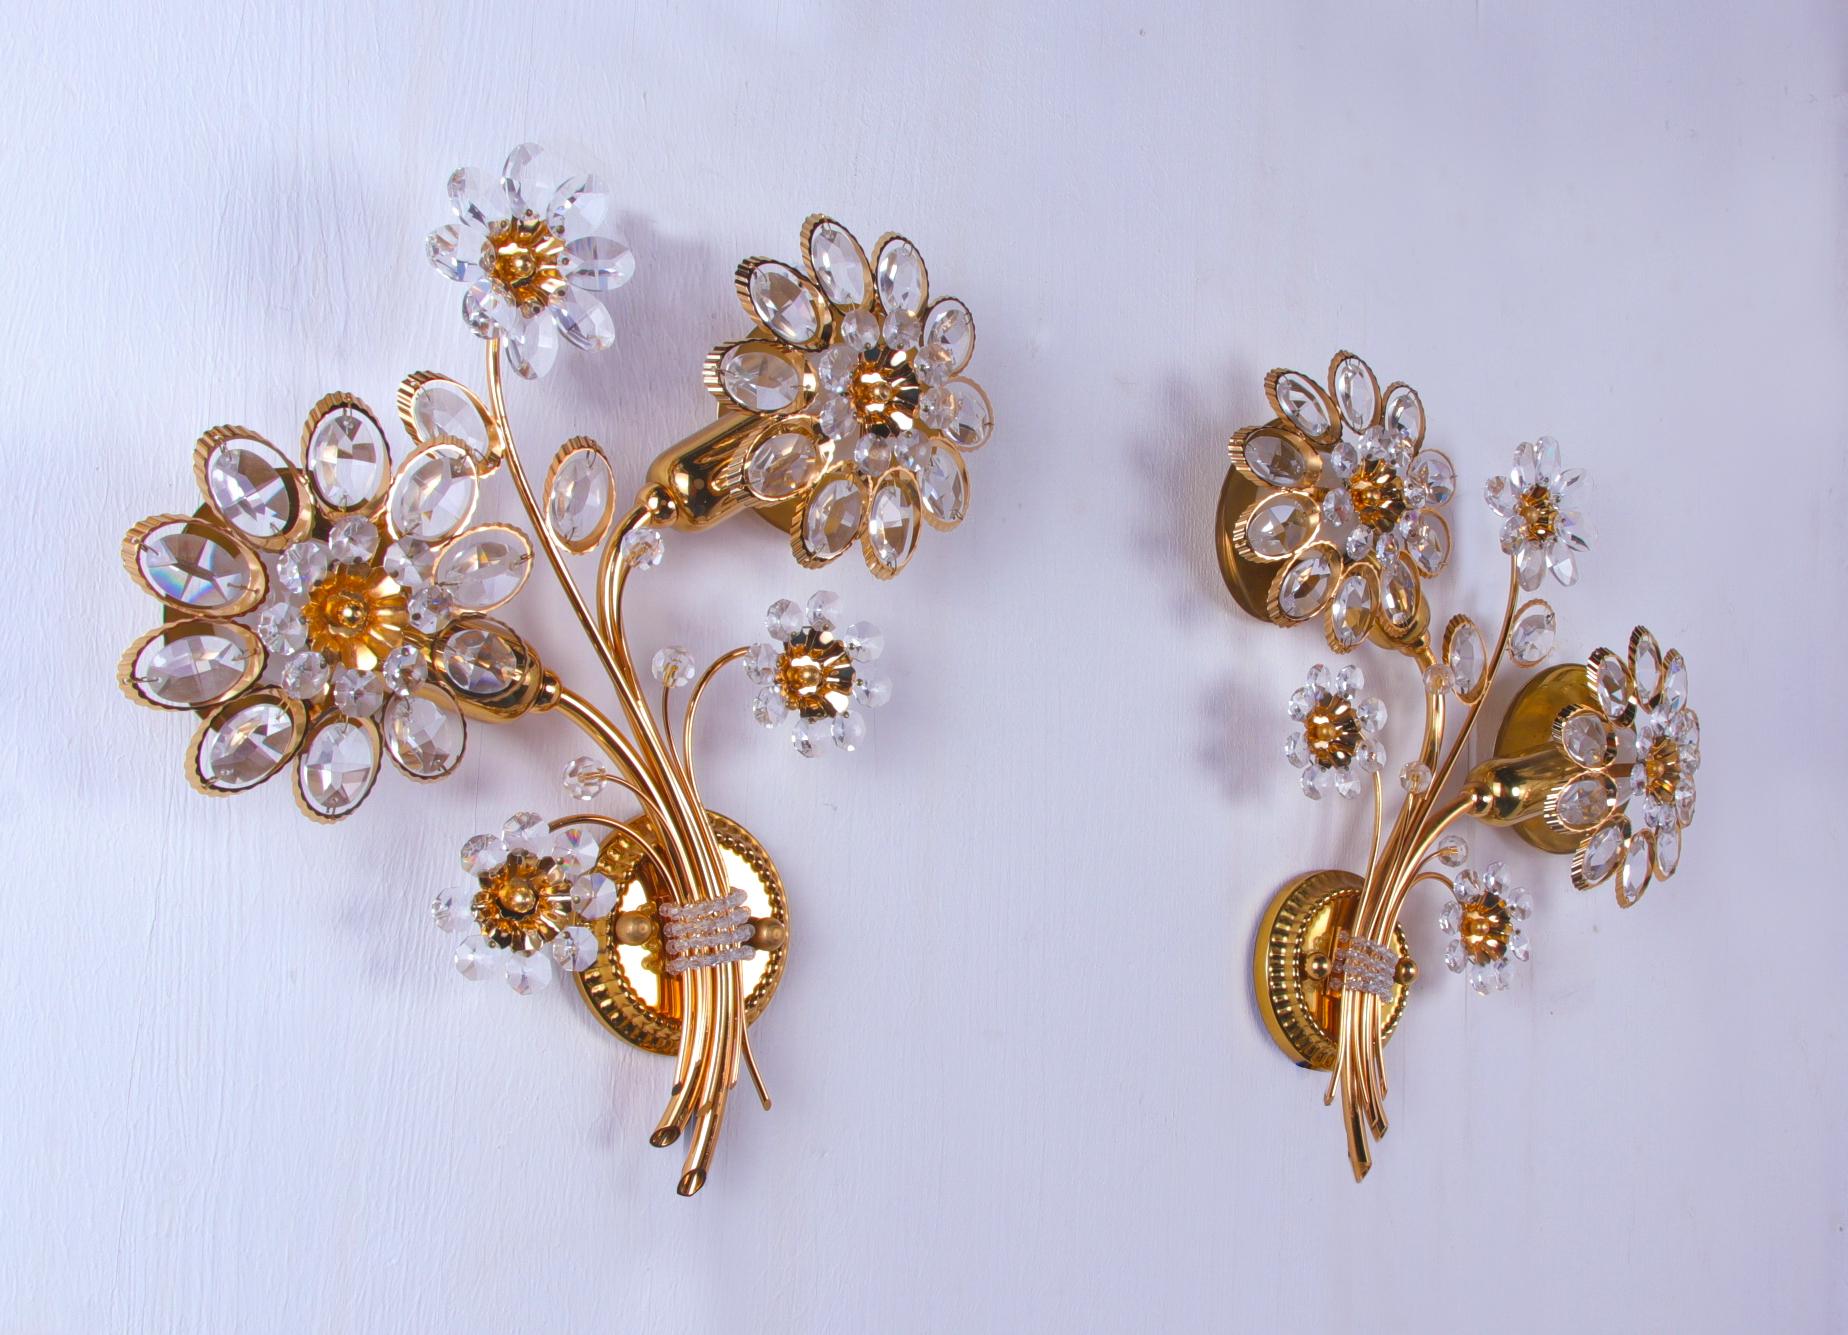 Elegant wall sconces with a gold-plated brass frame and Swarovski crystals. These lamps have an incomparable unique character. A touch of luxury fills the room. 

Manufacturer: Palwa, Palme & Walter., Germany. 
Measures: diameter 12.2